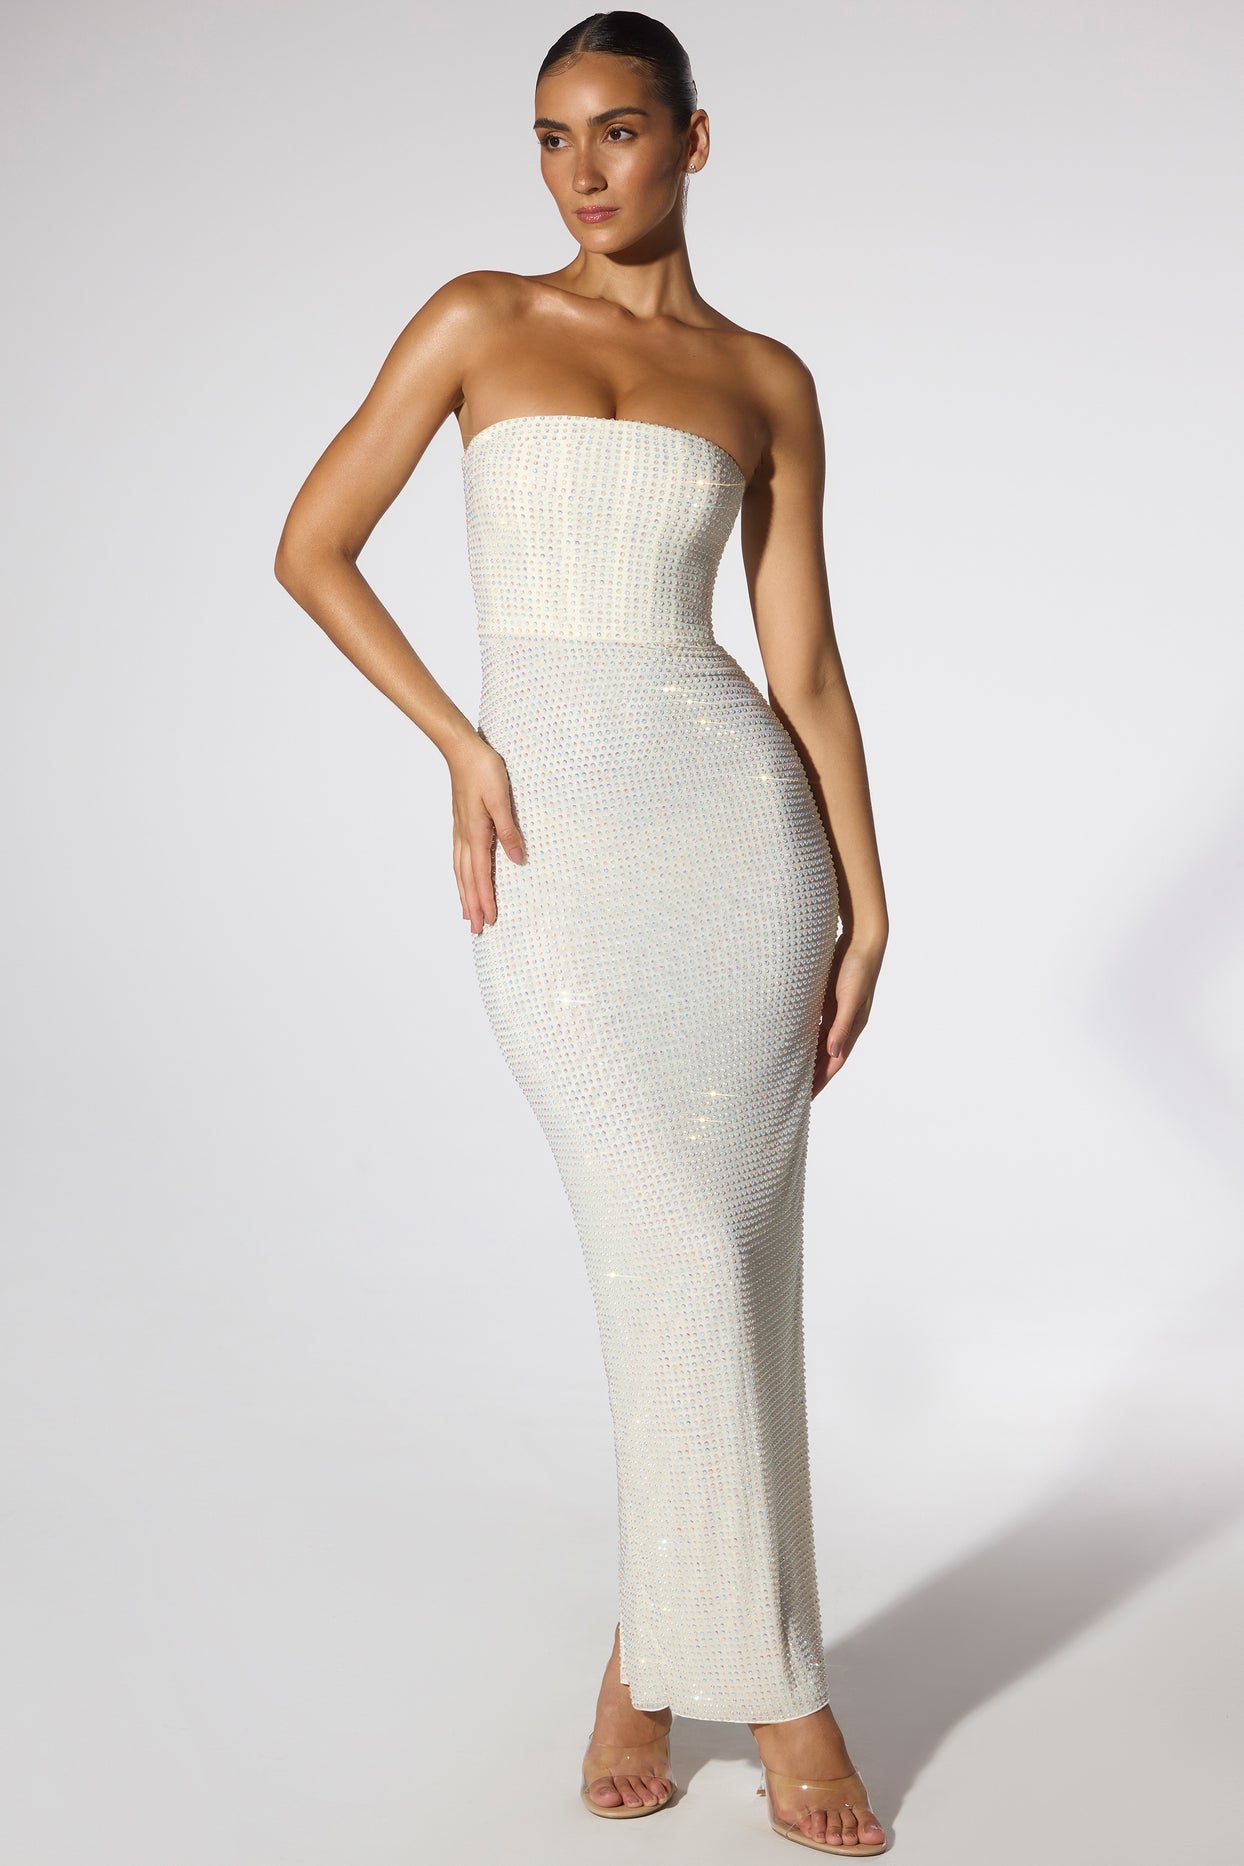 Daleyza Embellished Strapless Evening Gown in Ivory | Oh Polly